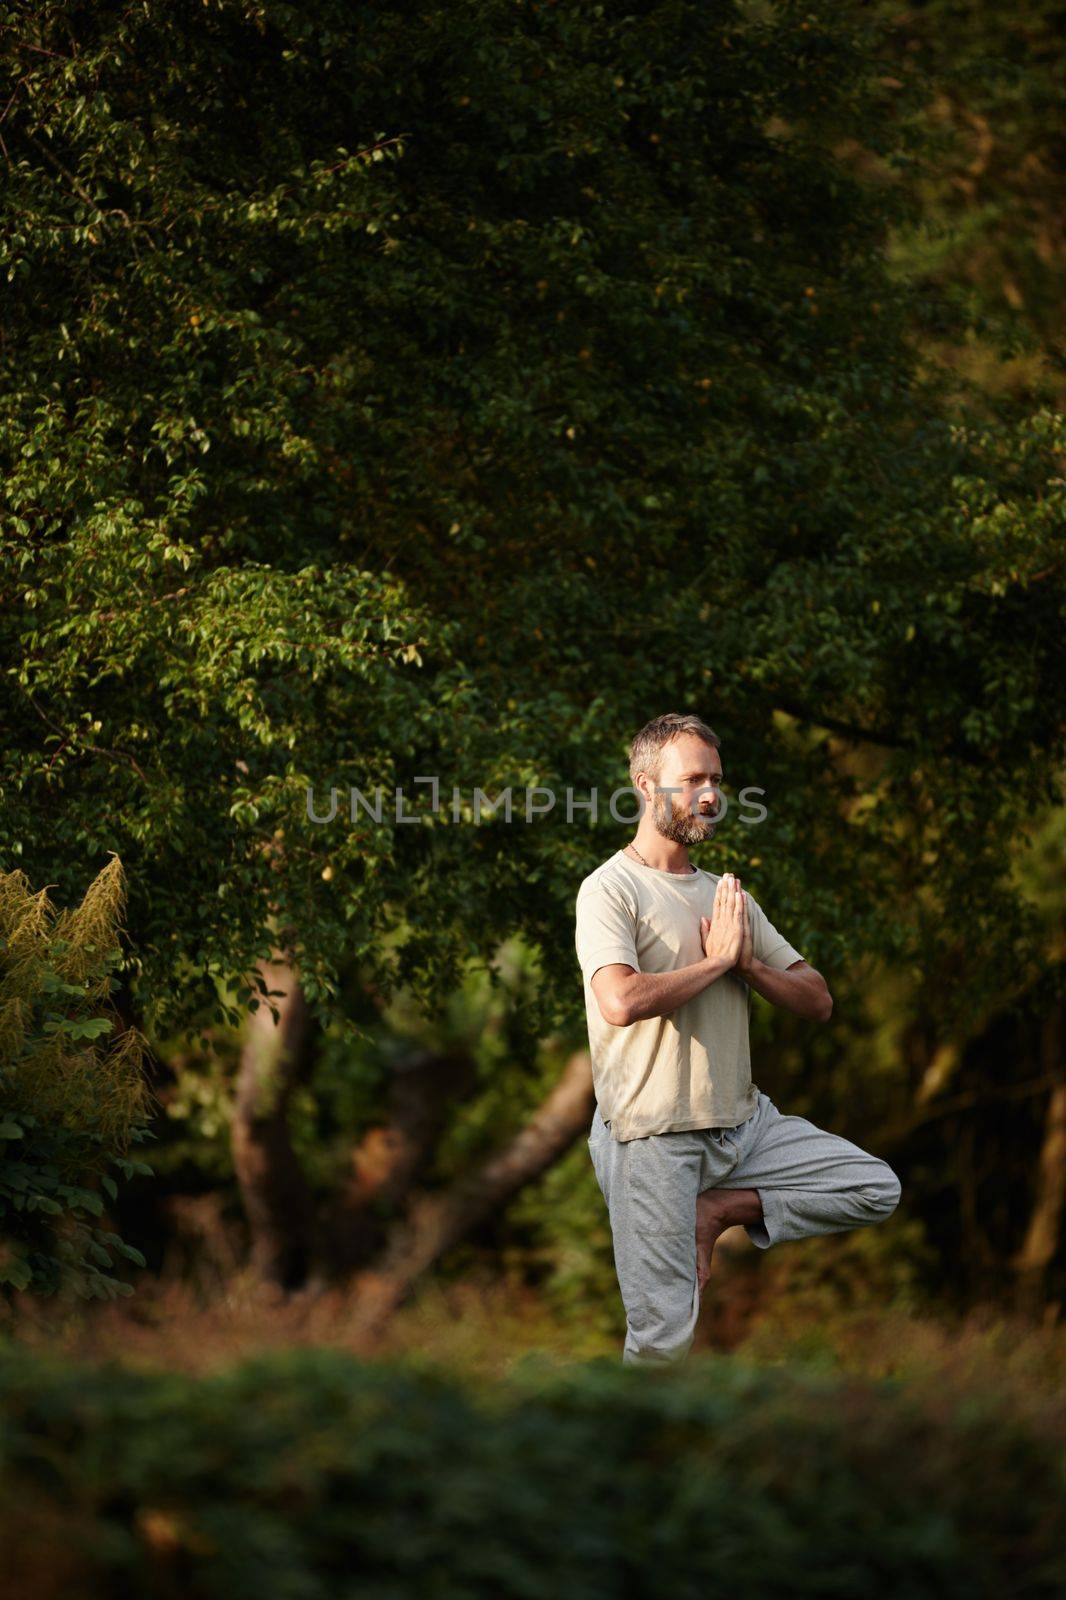 He found a tranquil yoga spot. a mature man doing a standing yoga pose in nature. by YuriArcurs